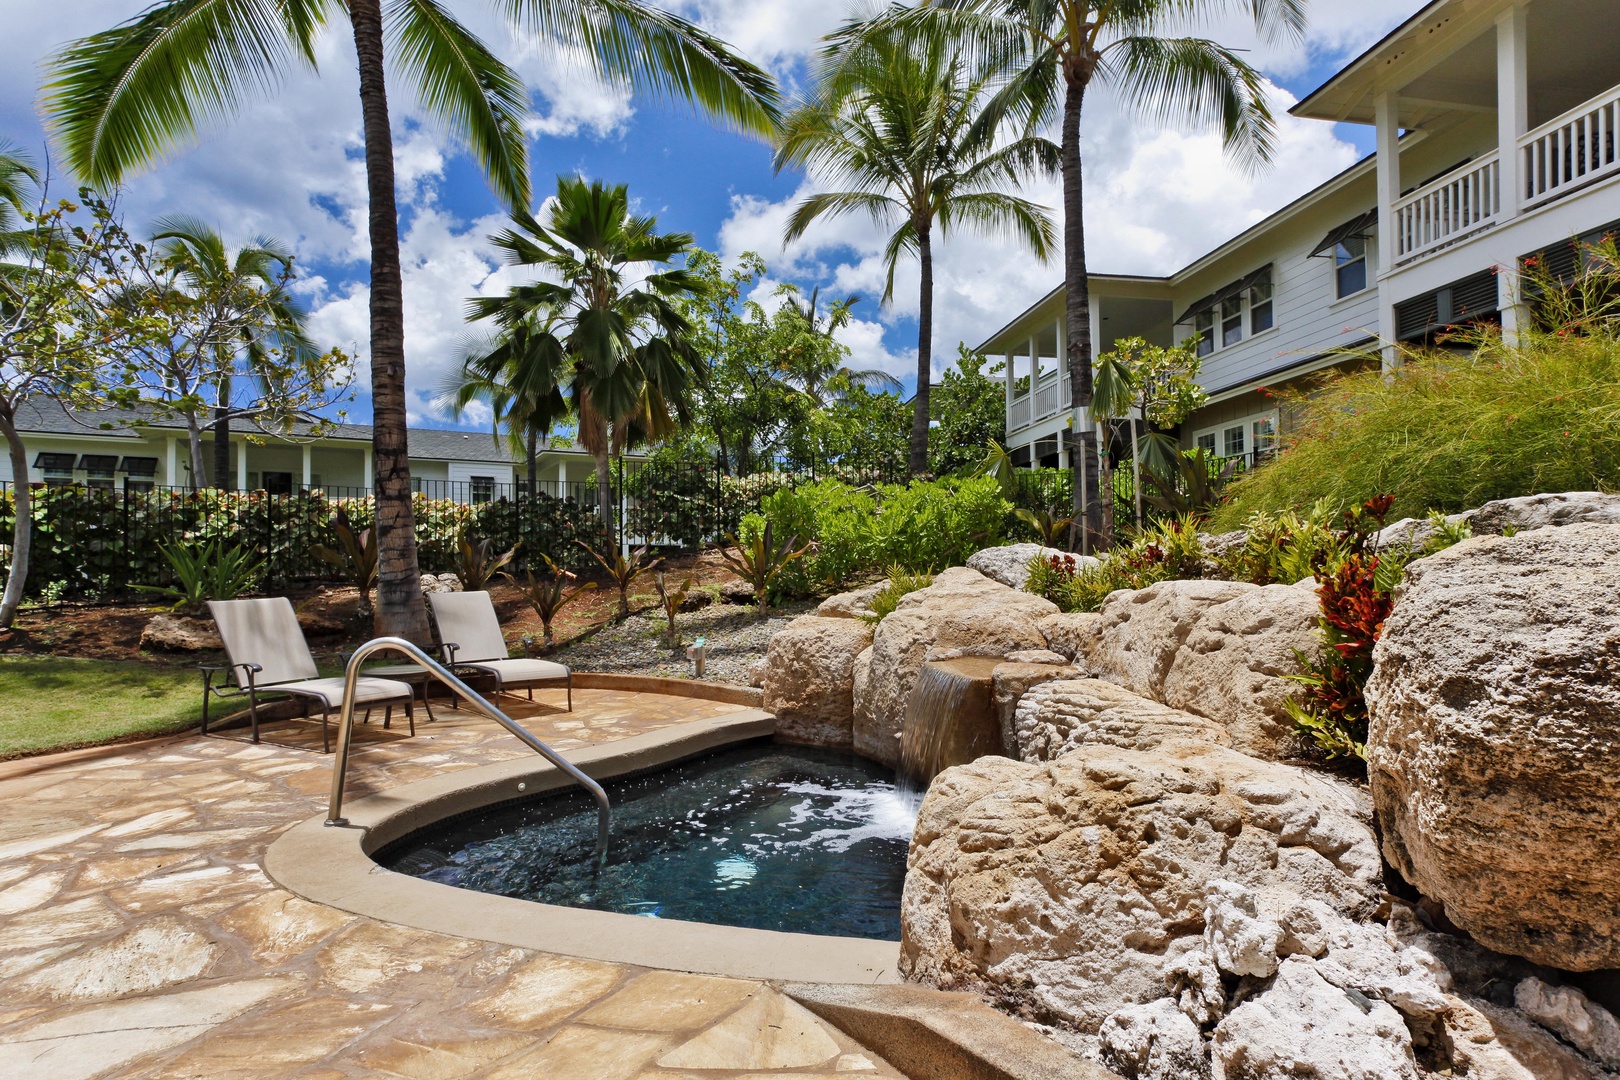 Kapolei Vacation Rentals, Coconut Plantation 1108-2 - Relax in the hot tub in the center of the palm fringed coconut plantation.